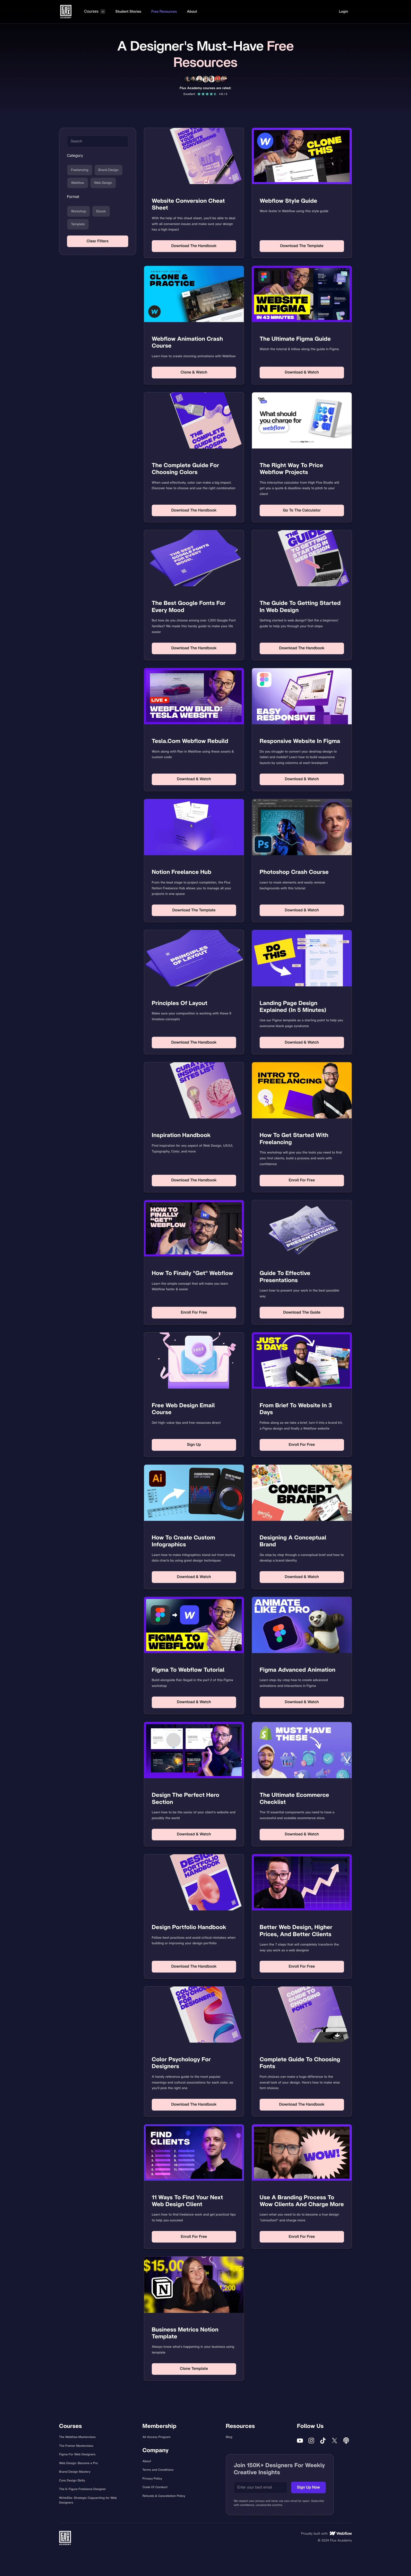 Flux Academy Landing Page Example: Supercharge your web design skills. Make yourself indispensable by learning the latest real-world web design skills. Flux Academy mentors are here to take your career to the next level.